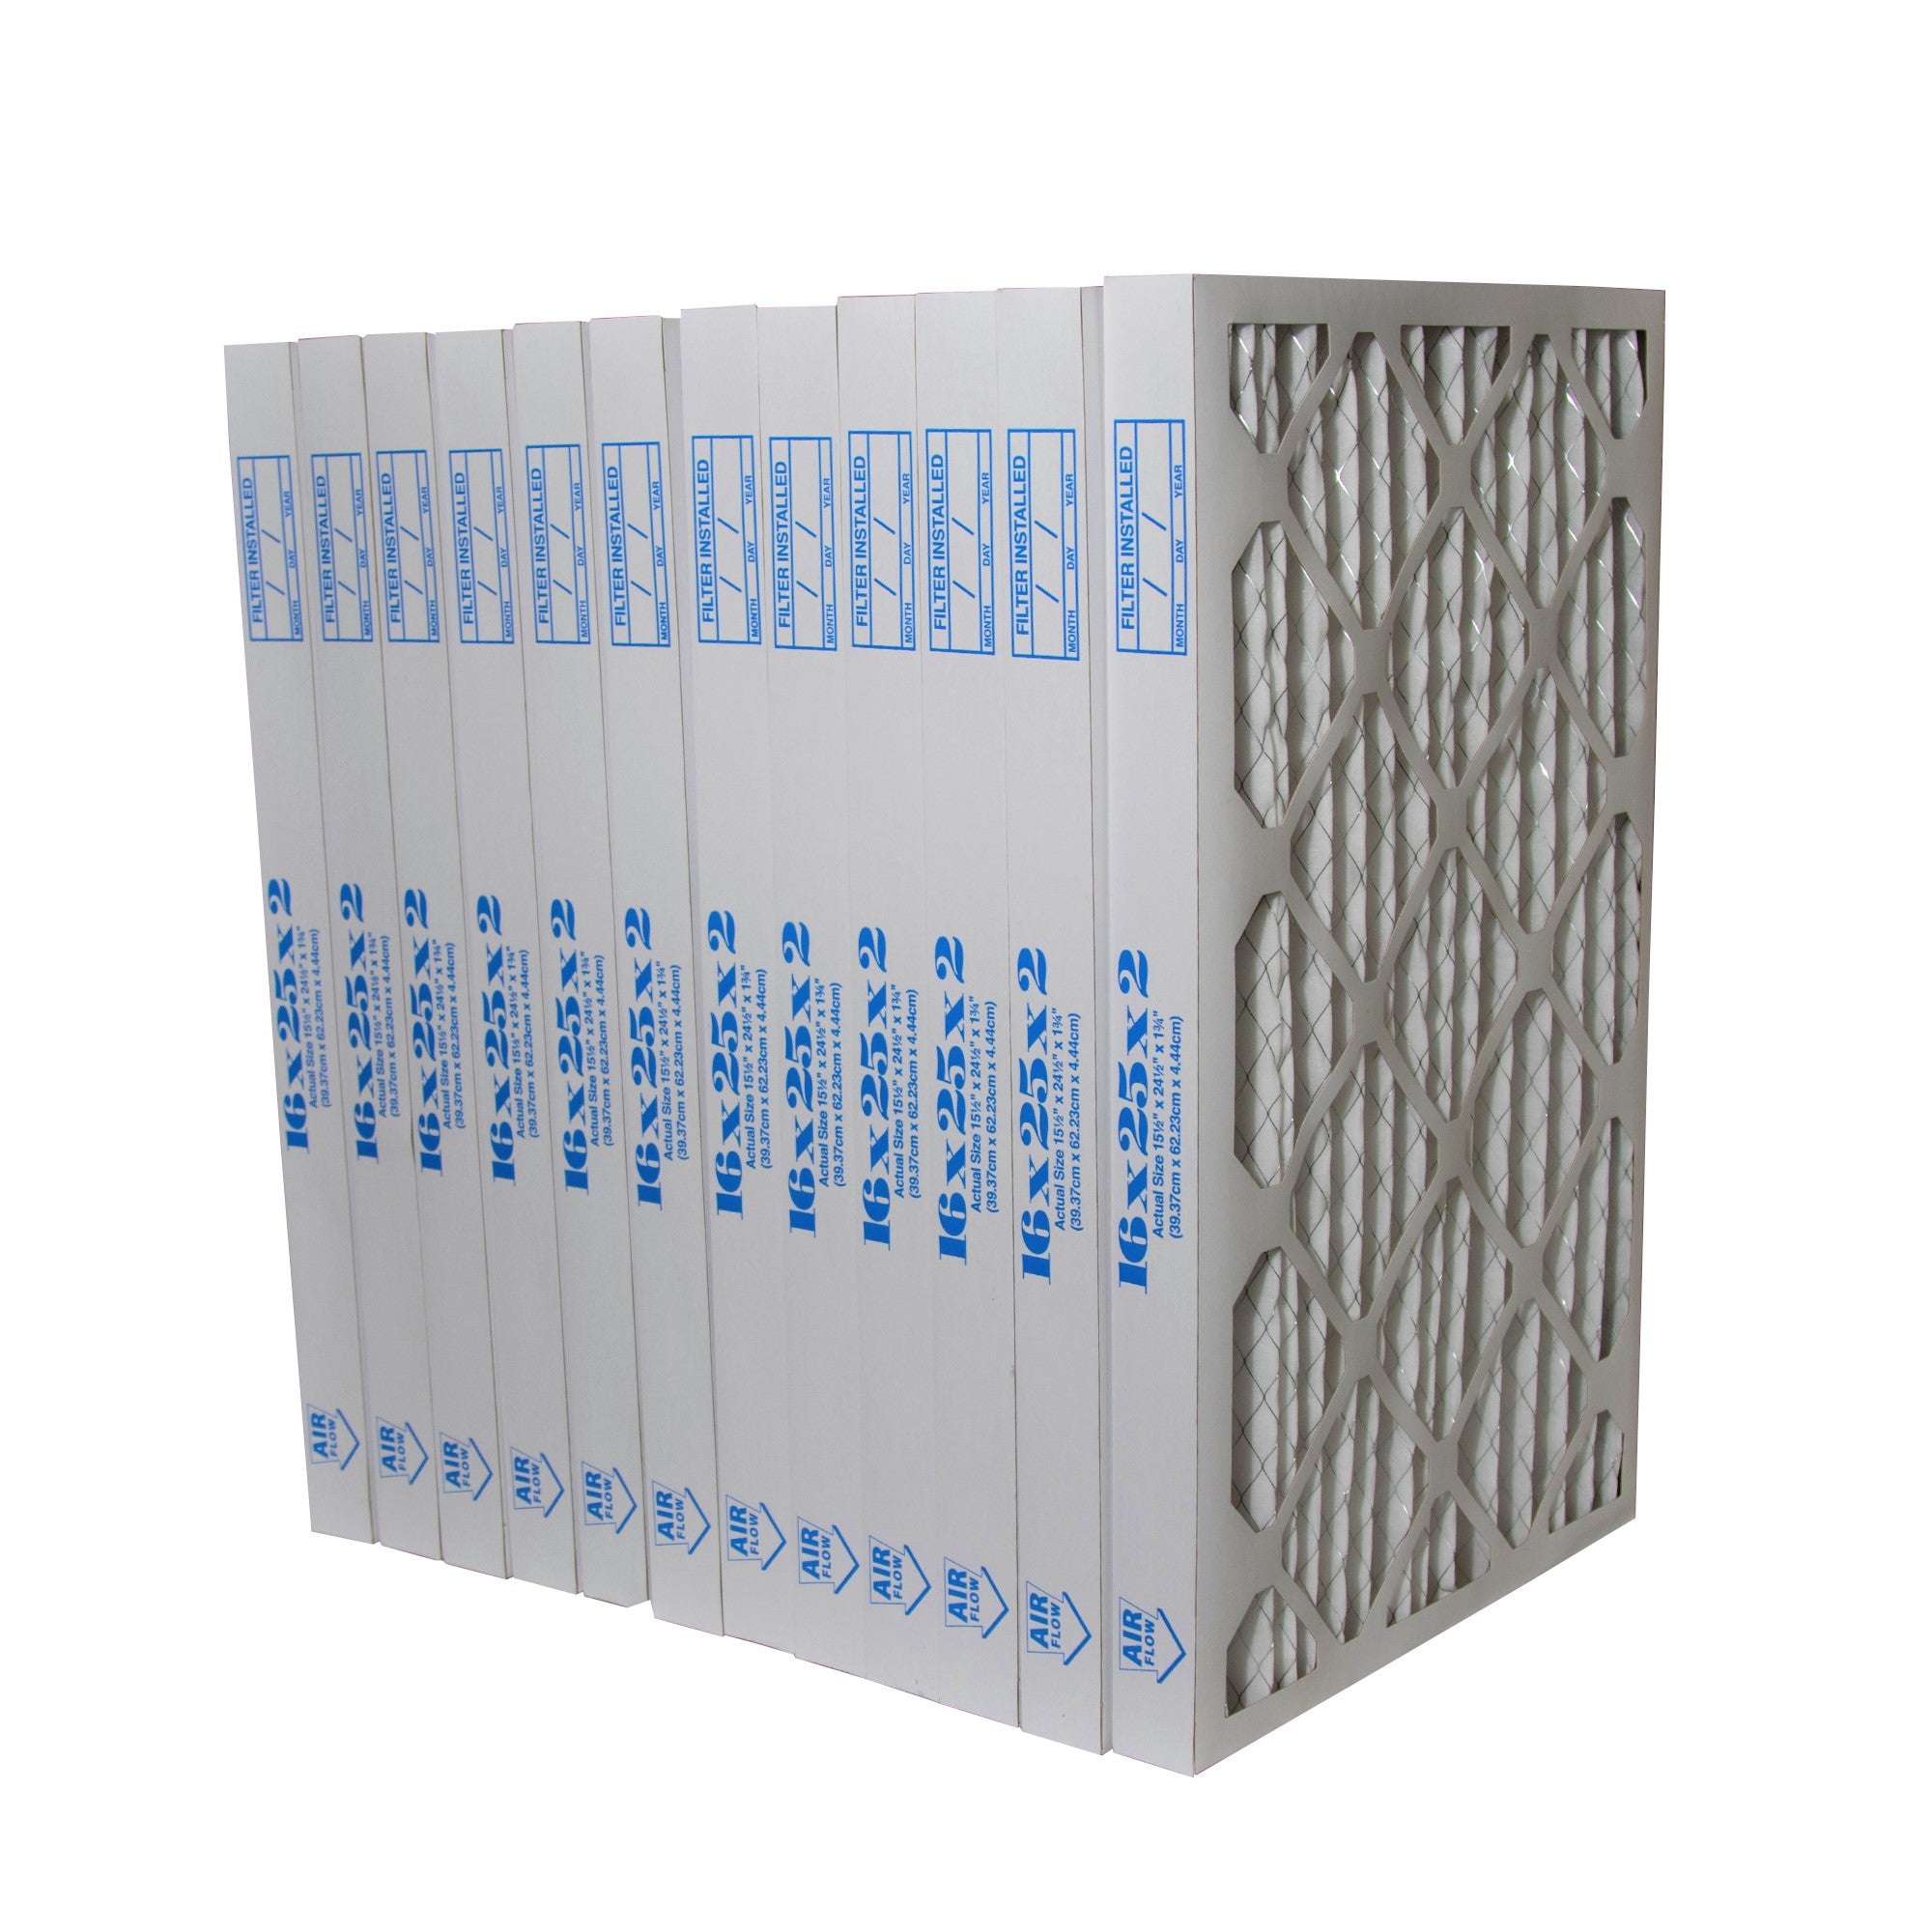 Dafco 16 x 25 x 2 Pleated Filter. MERV 8 Rated. Case of 12